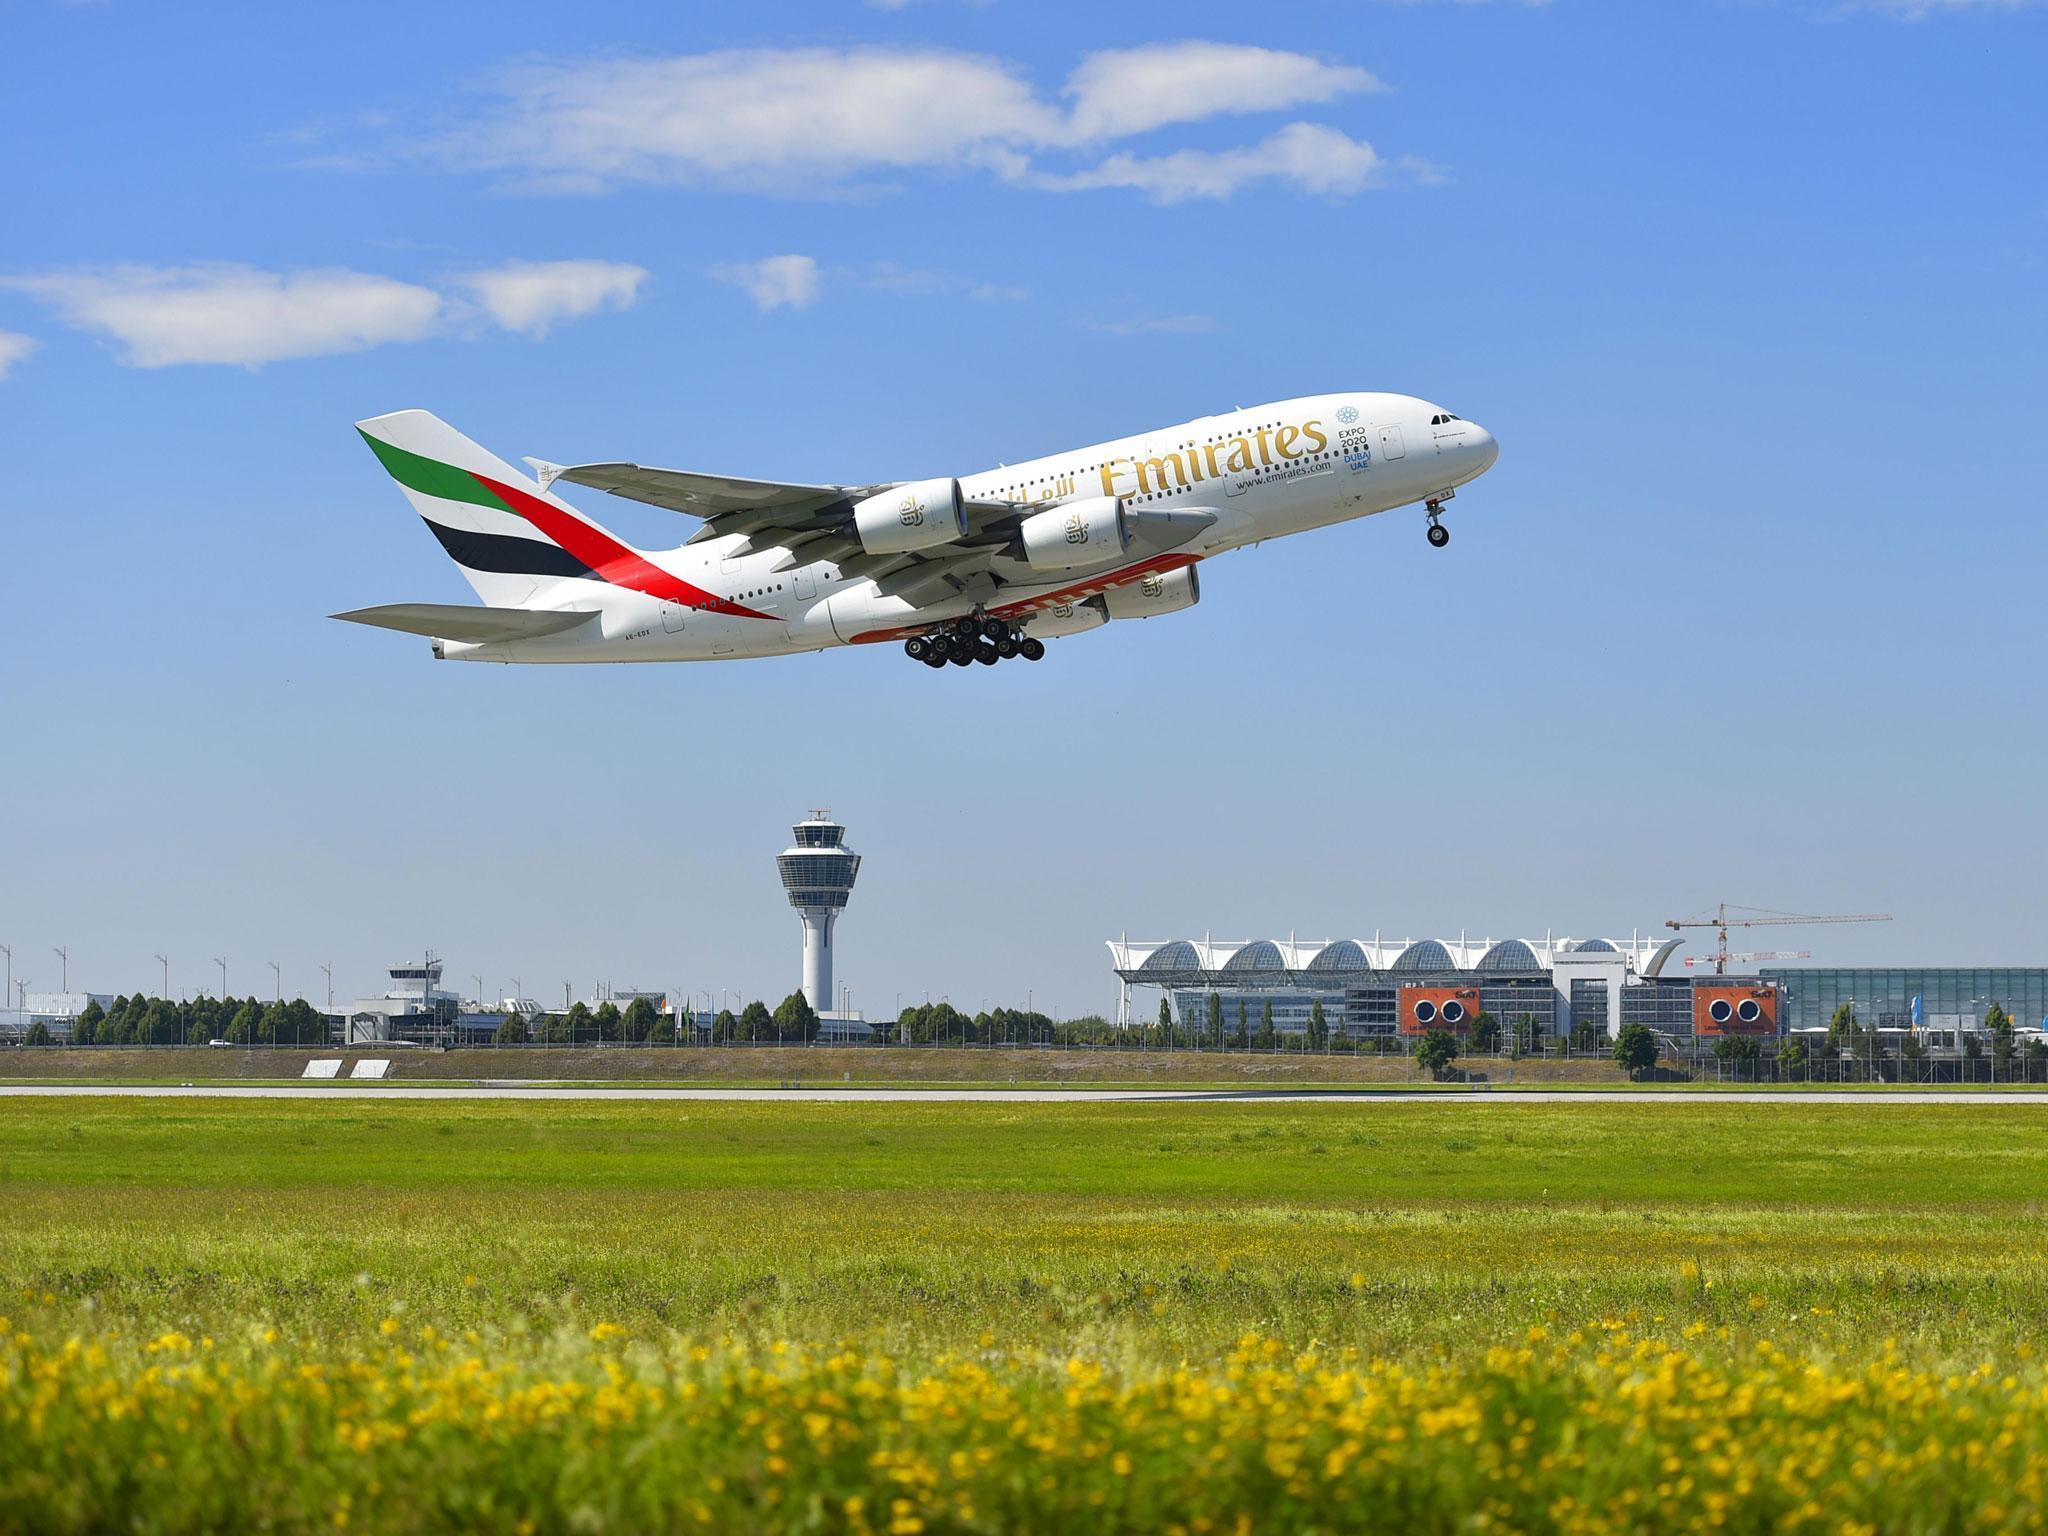 As a non-EU airline, Emirates is not obliged to pay compensation for delays outside Europe